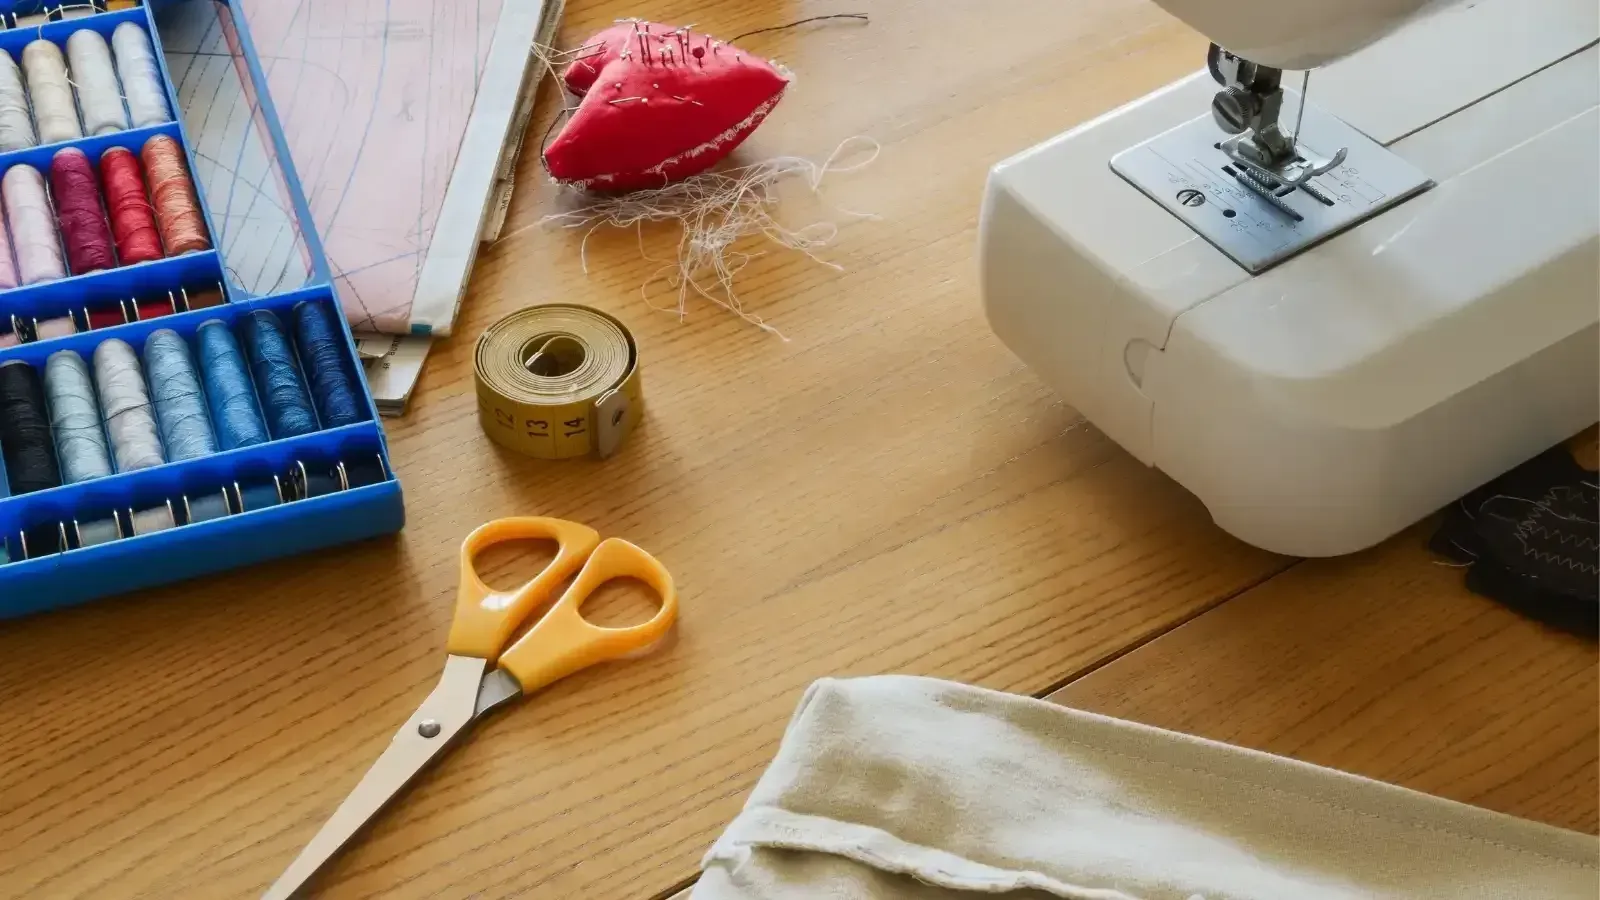 Learning to Sew: 14 Best Sewing Tips for Beginners